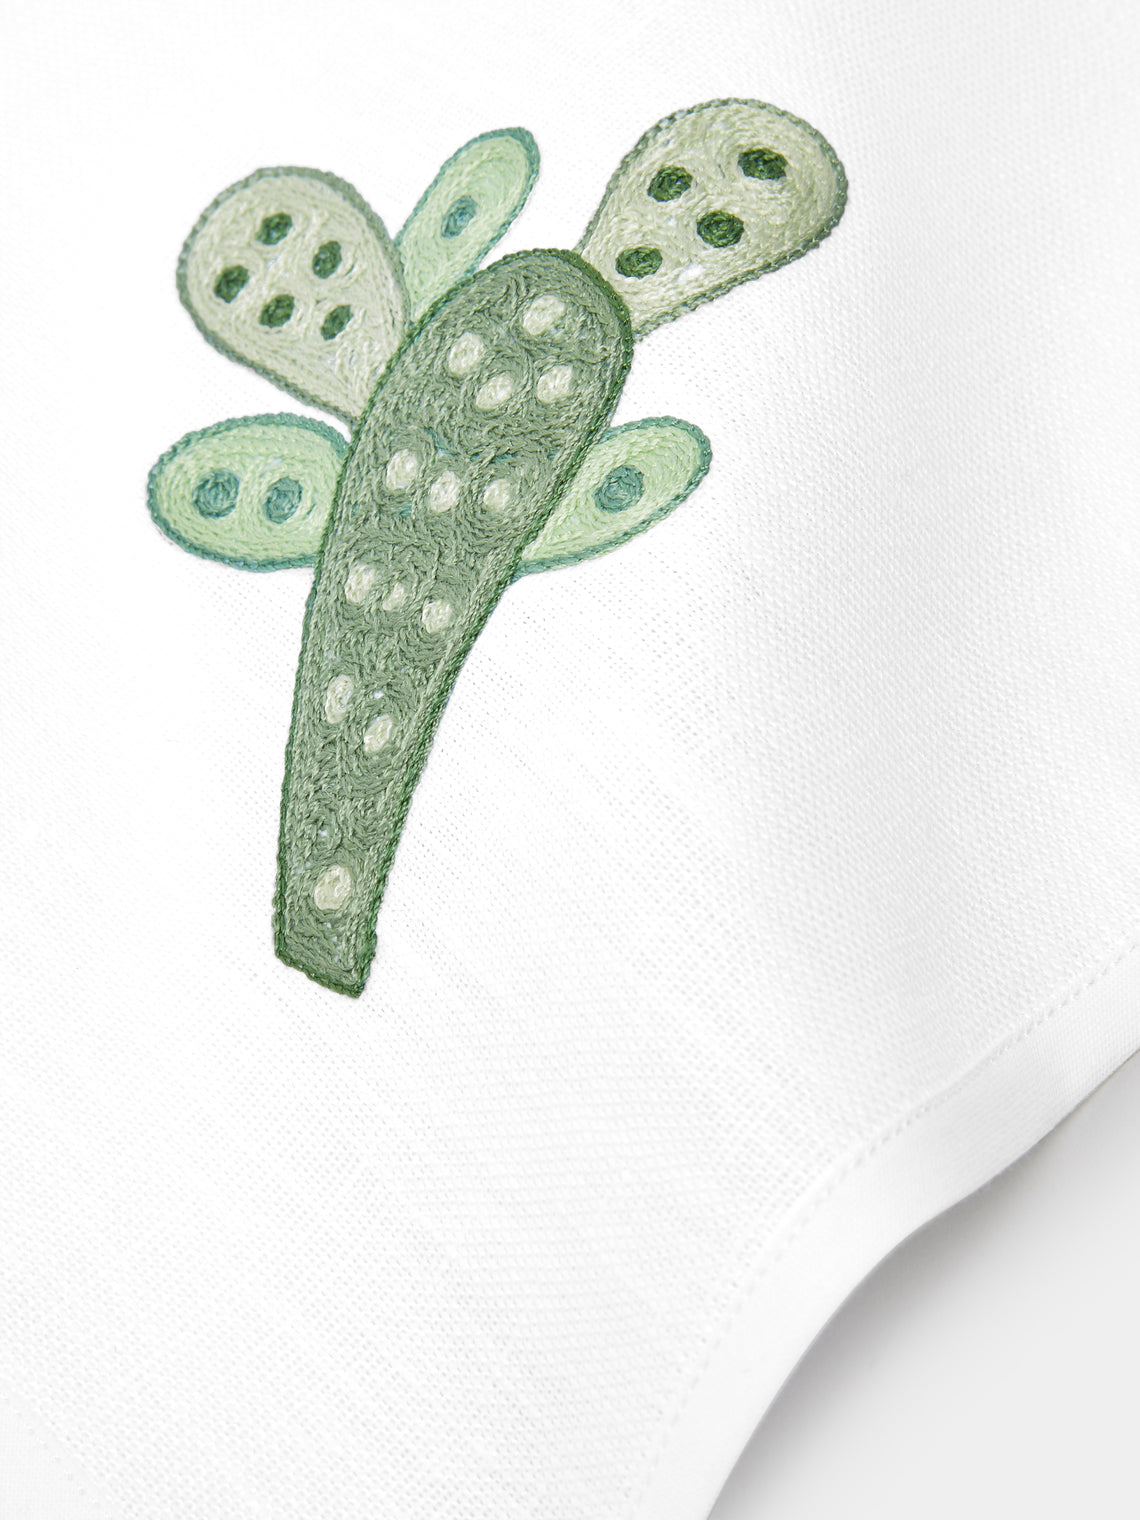 Loretta Caponi - Cactus Hand-Embroidered Linen Placemats and Napkins (Set of 2) -  - ABASK